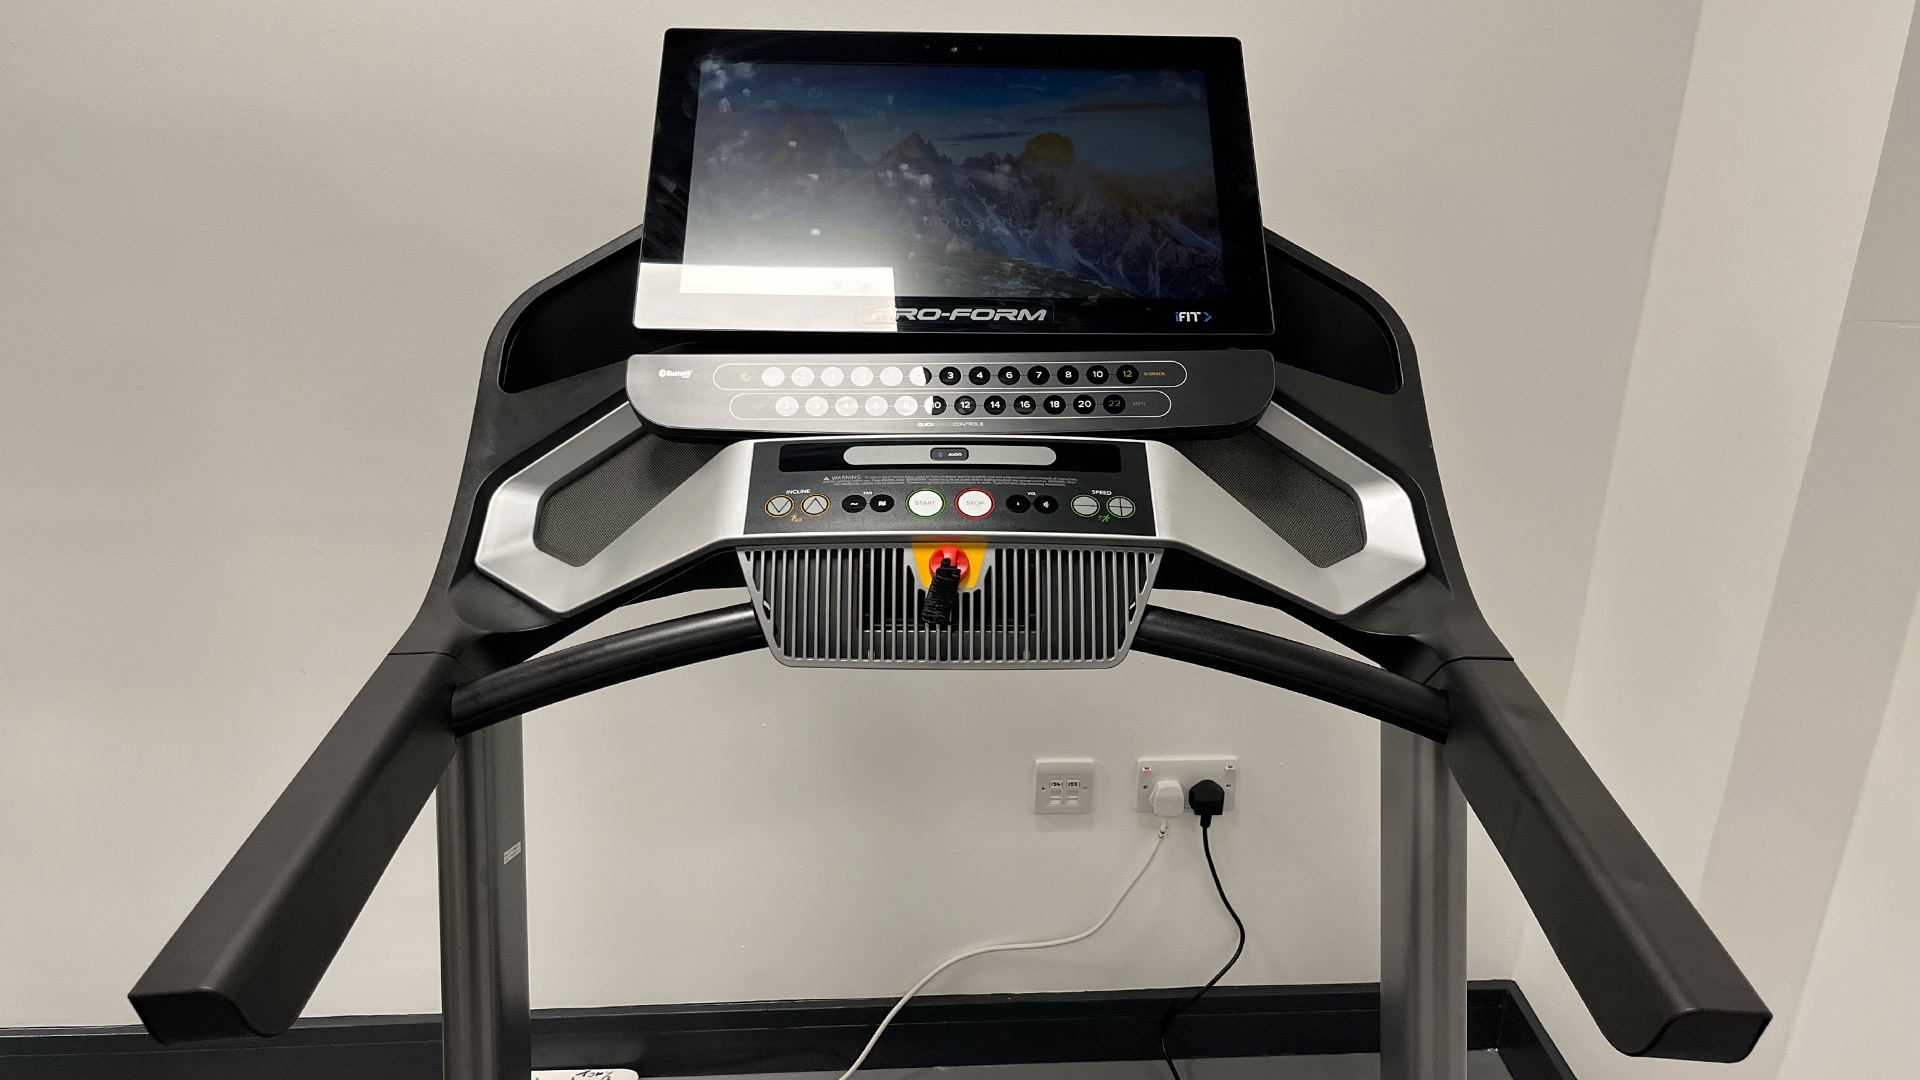 NordicTrack 2950 Commercial reivew: Image of NordicTrack being tested